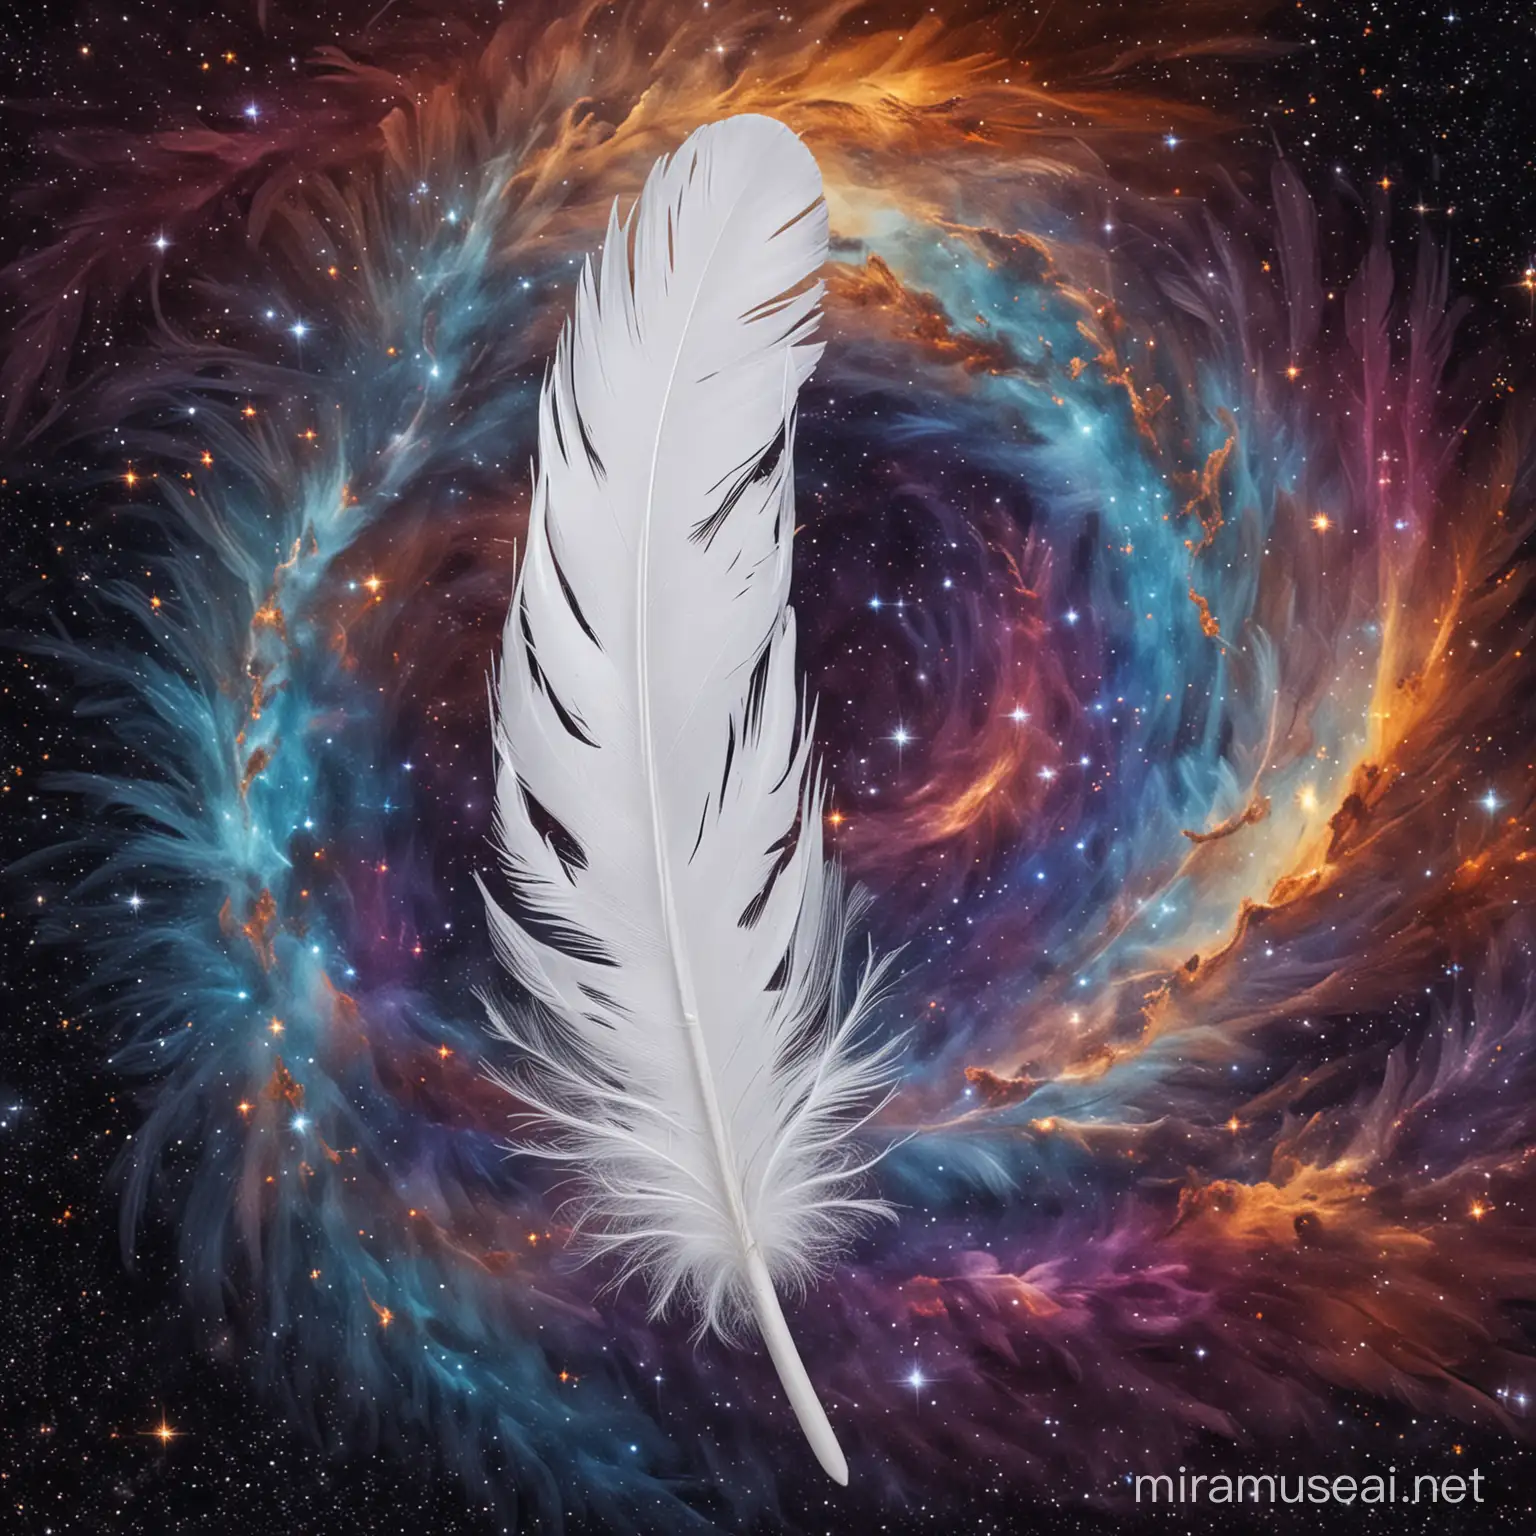 Ethereal White Feather Floating in Cosmic Splendor